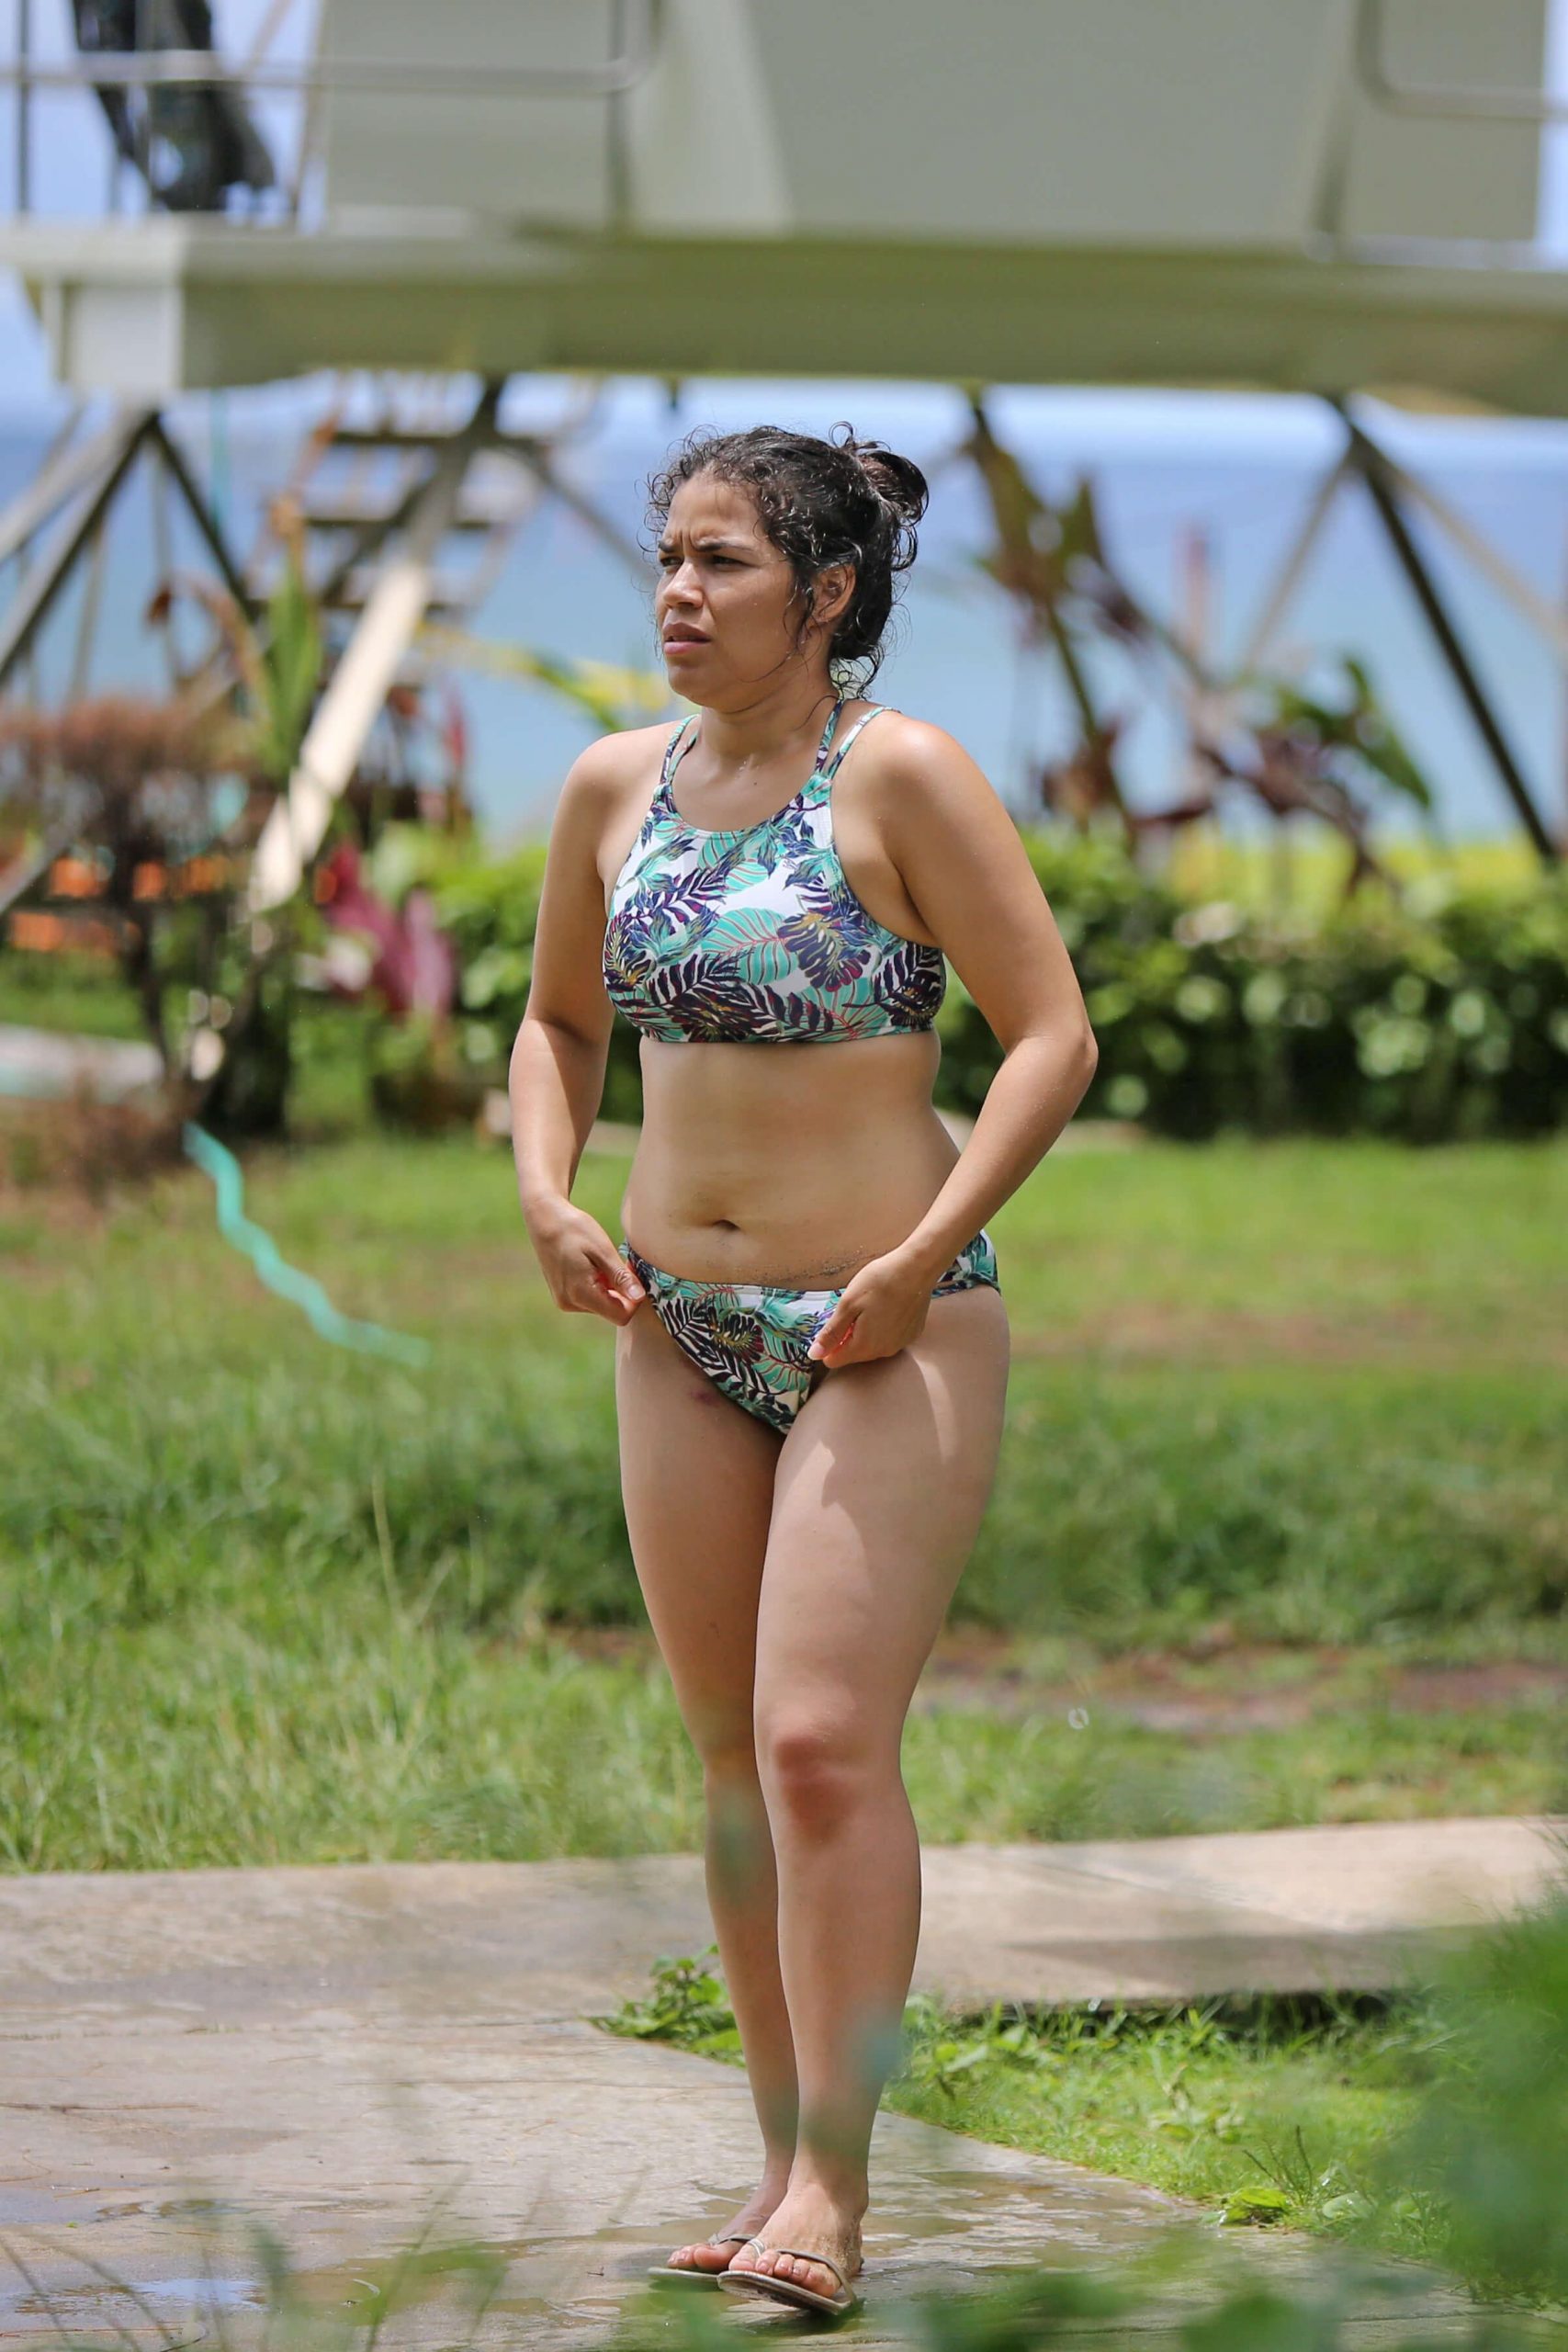 51 Sexy America Ferrera Boobs Pictures Reveal Her Lofty And Attractive Physique 56